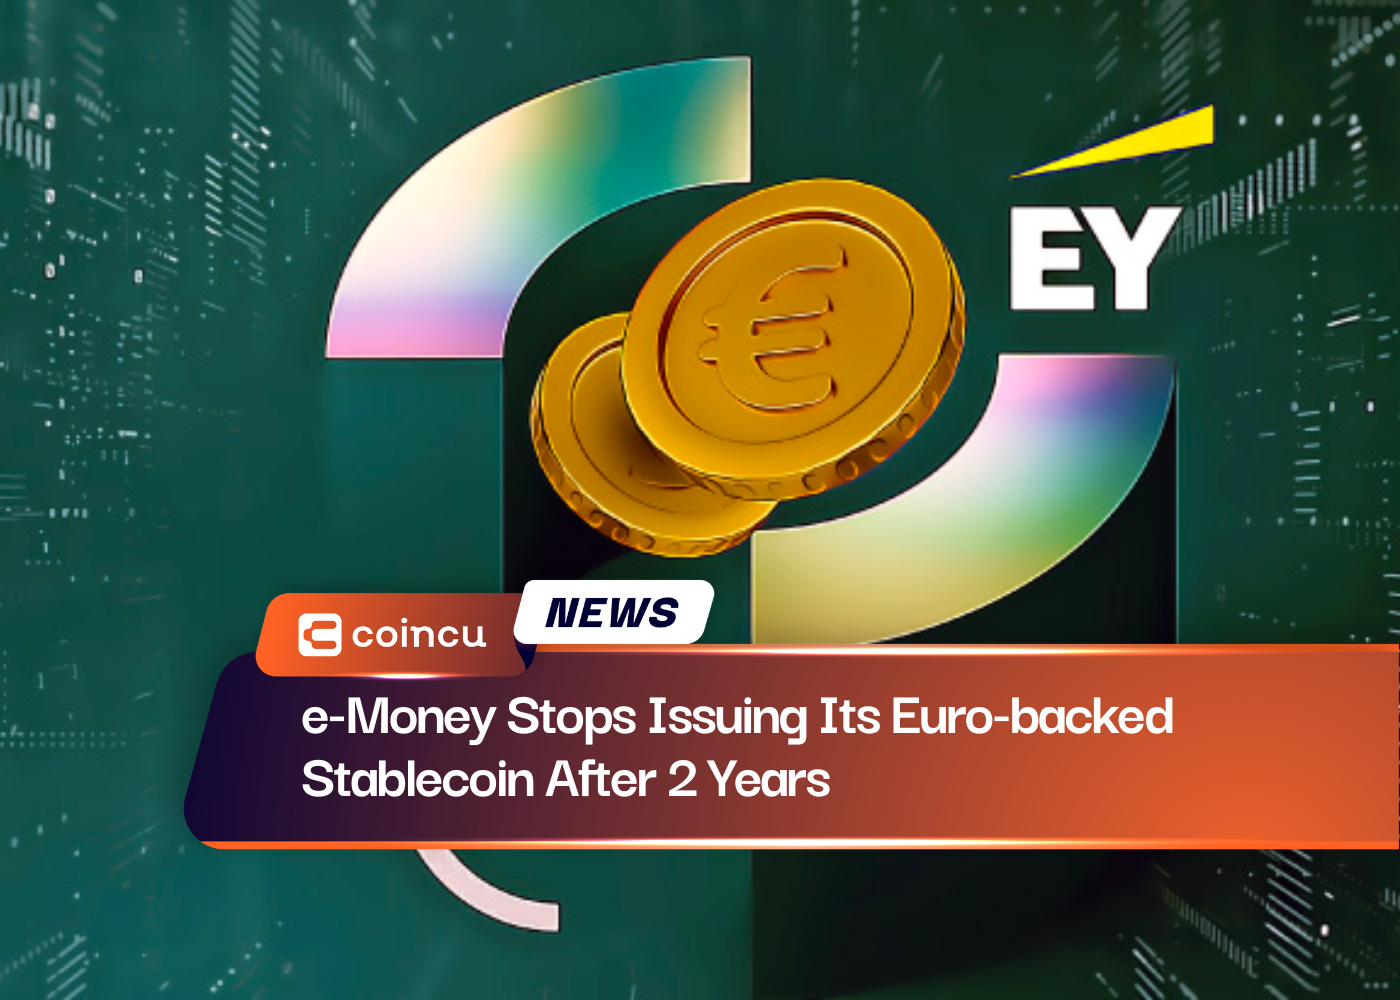 e-Money Stops Issuing Its Euro-backed Stablecoin After 2 Years